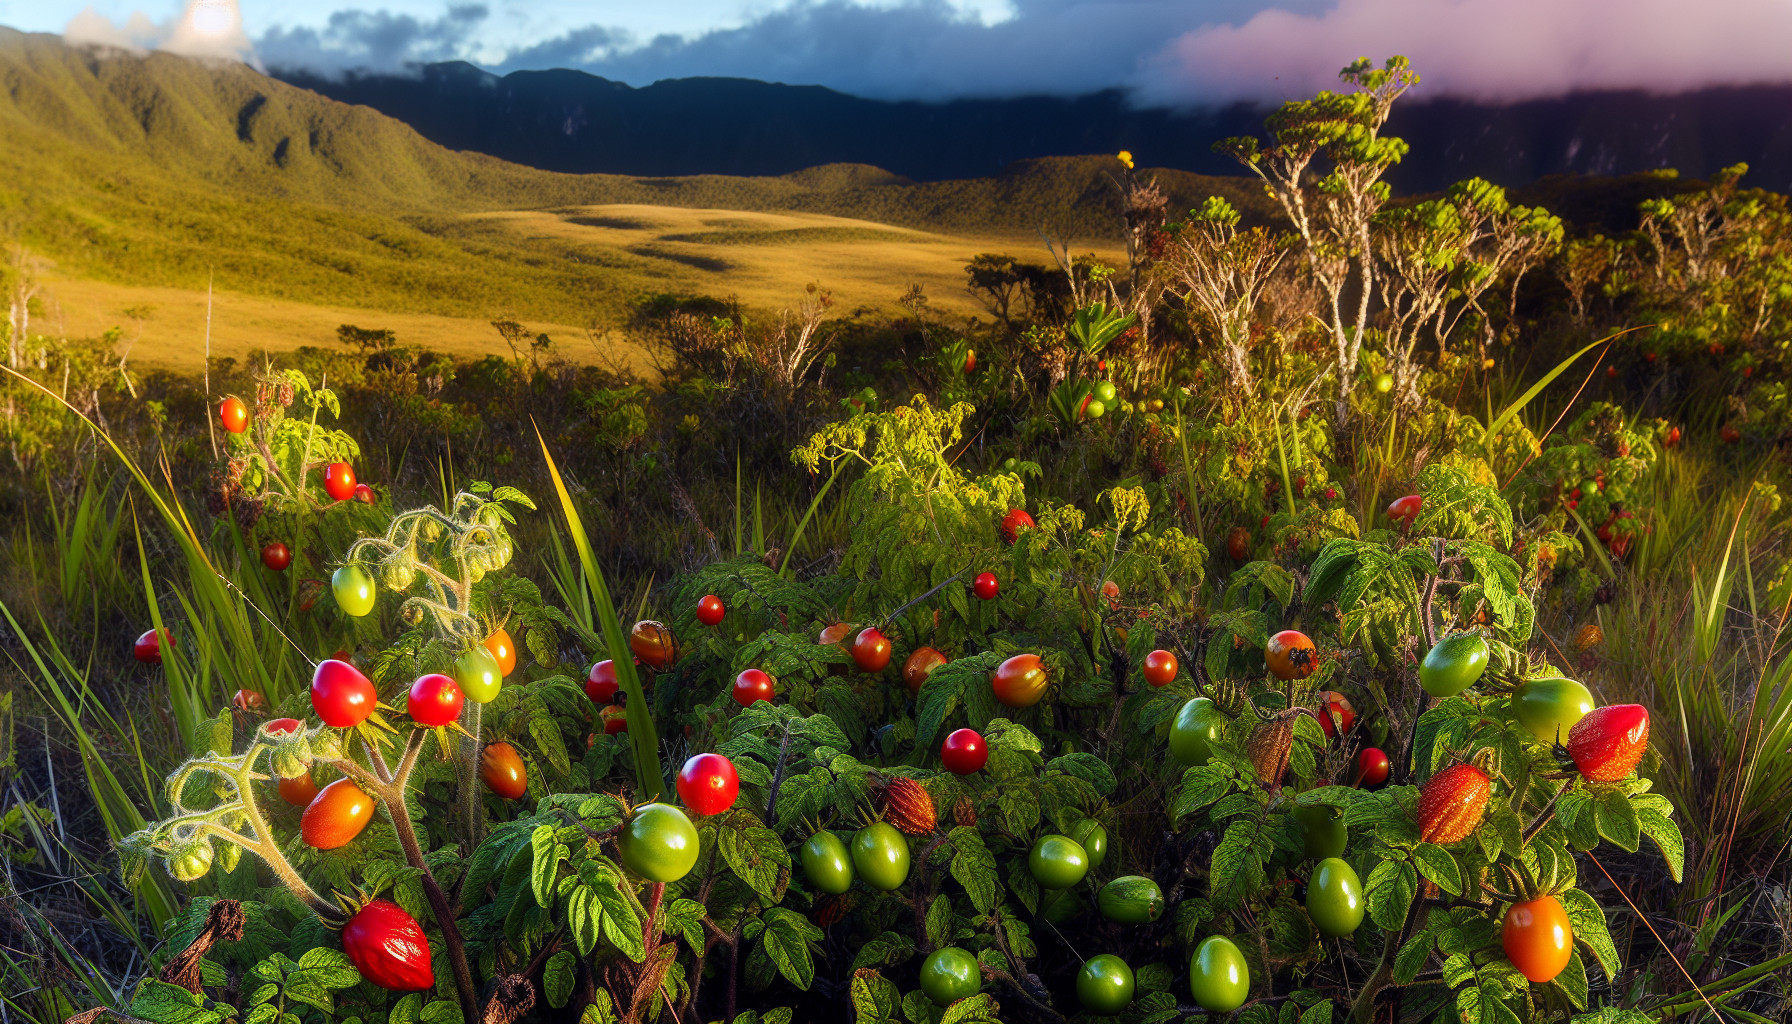 Wild tomatoes in South America